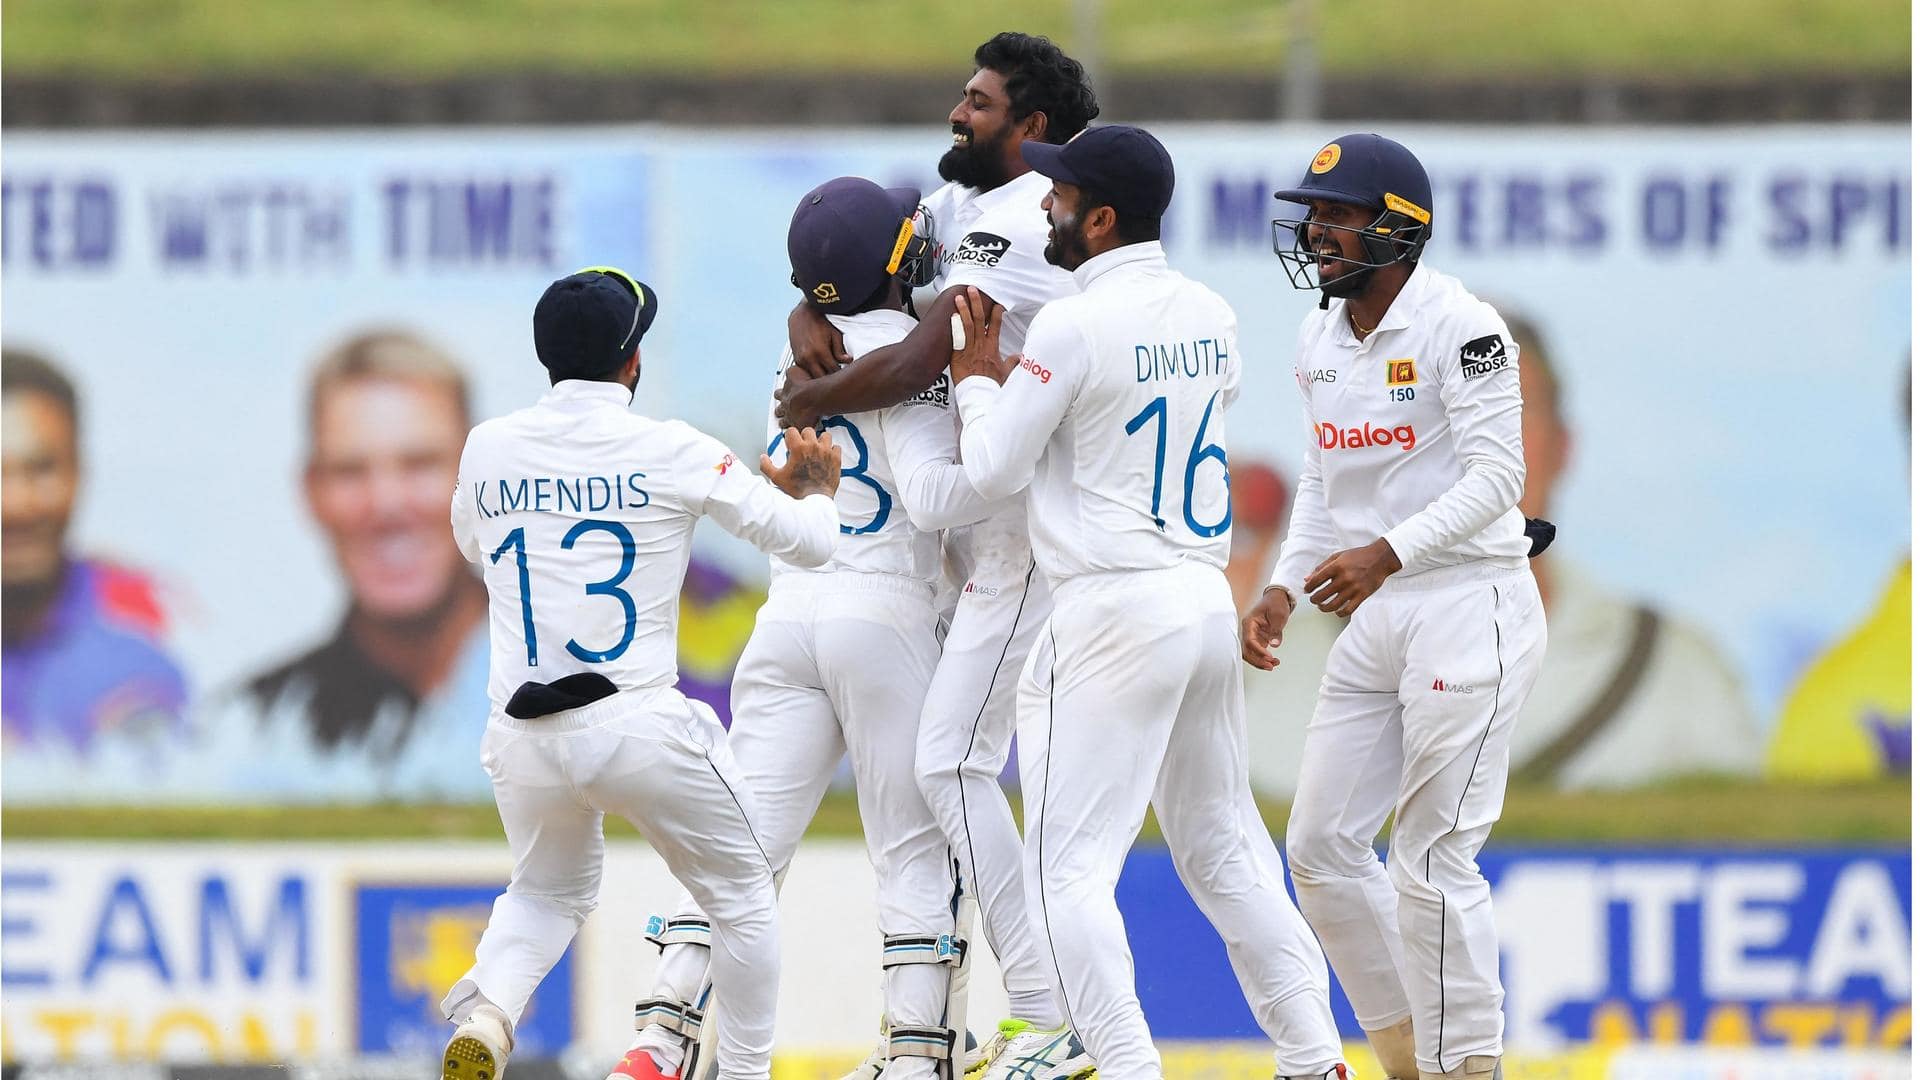 Prabath Jayasuriya completes 50 Test wickets in Galle with four-fer